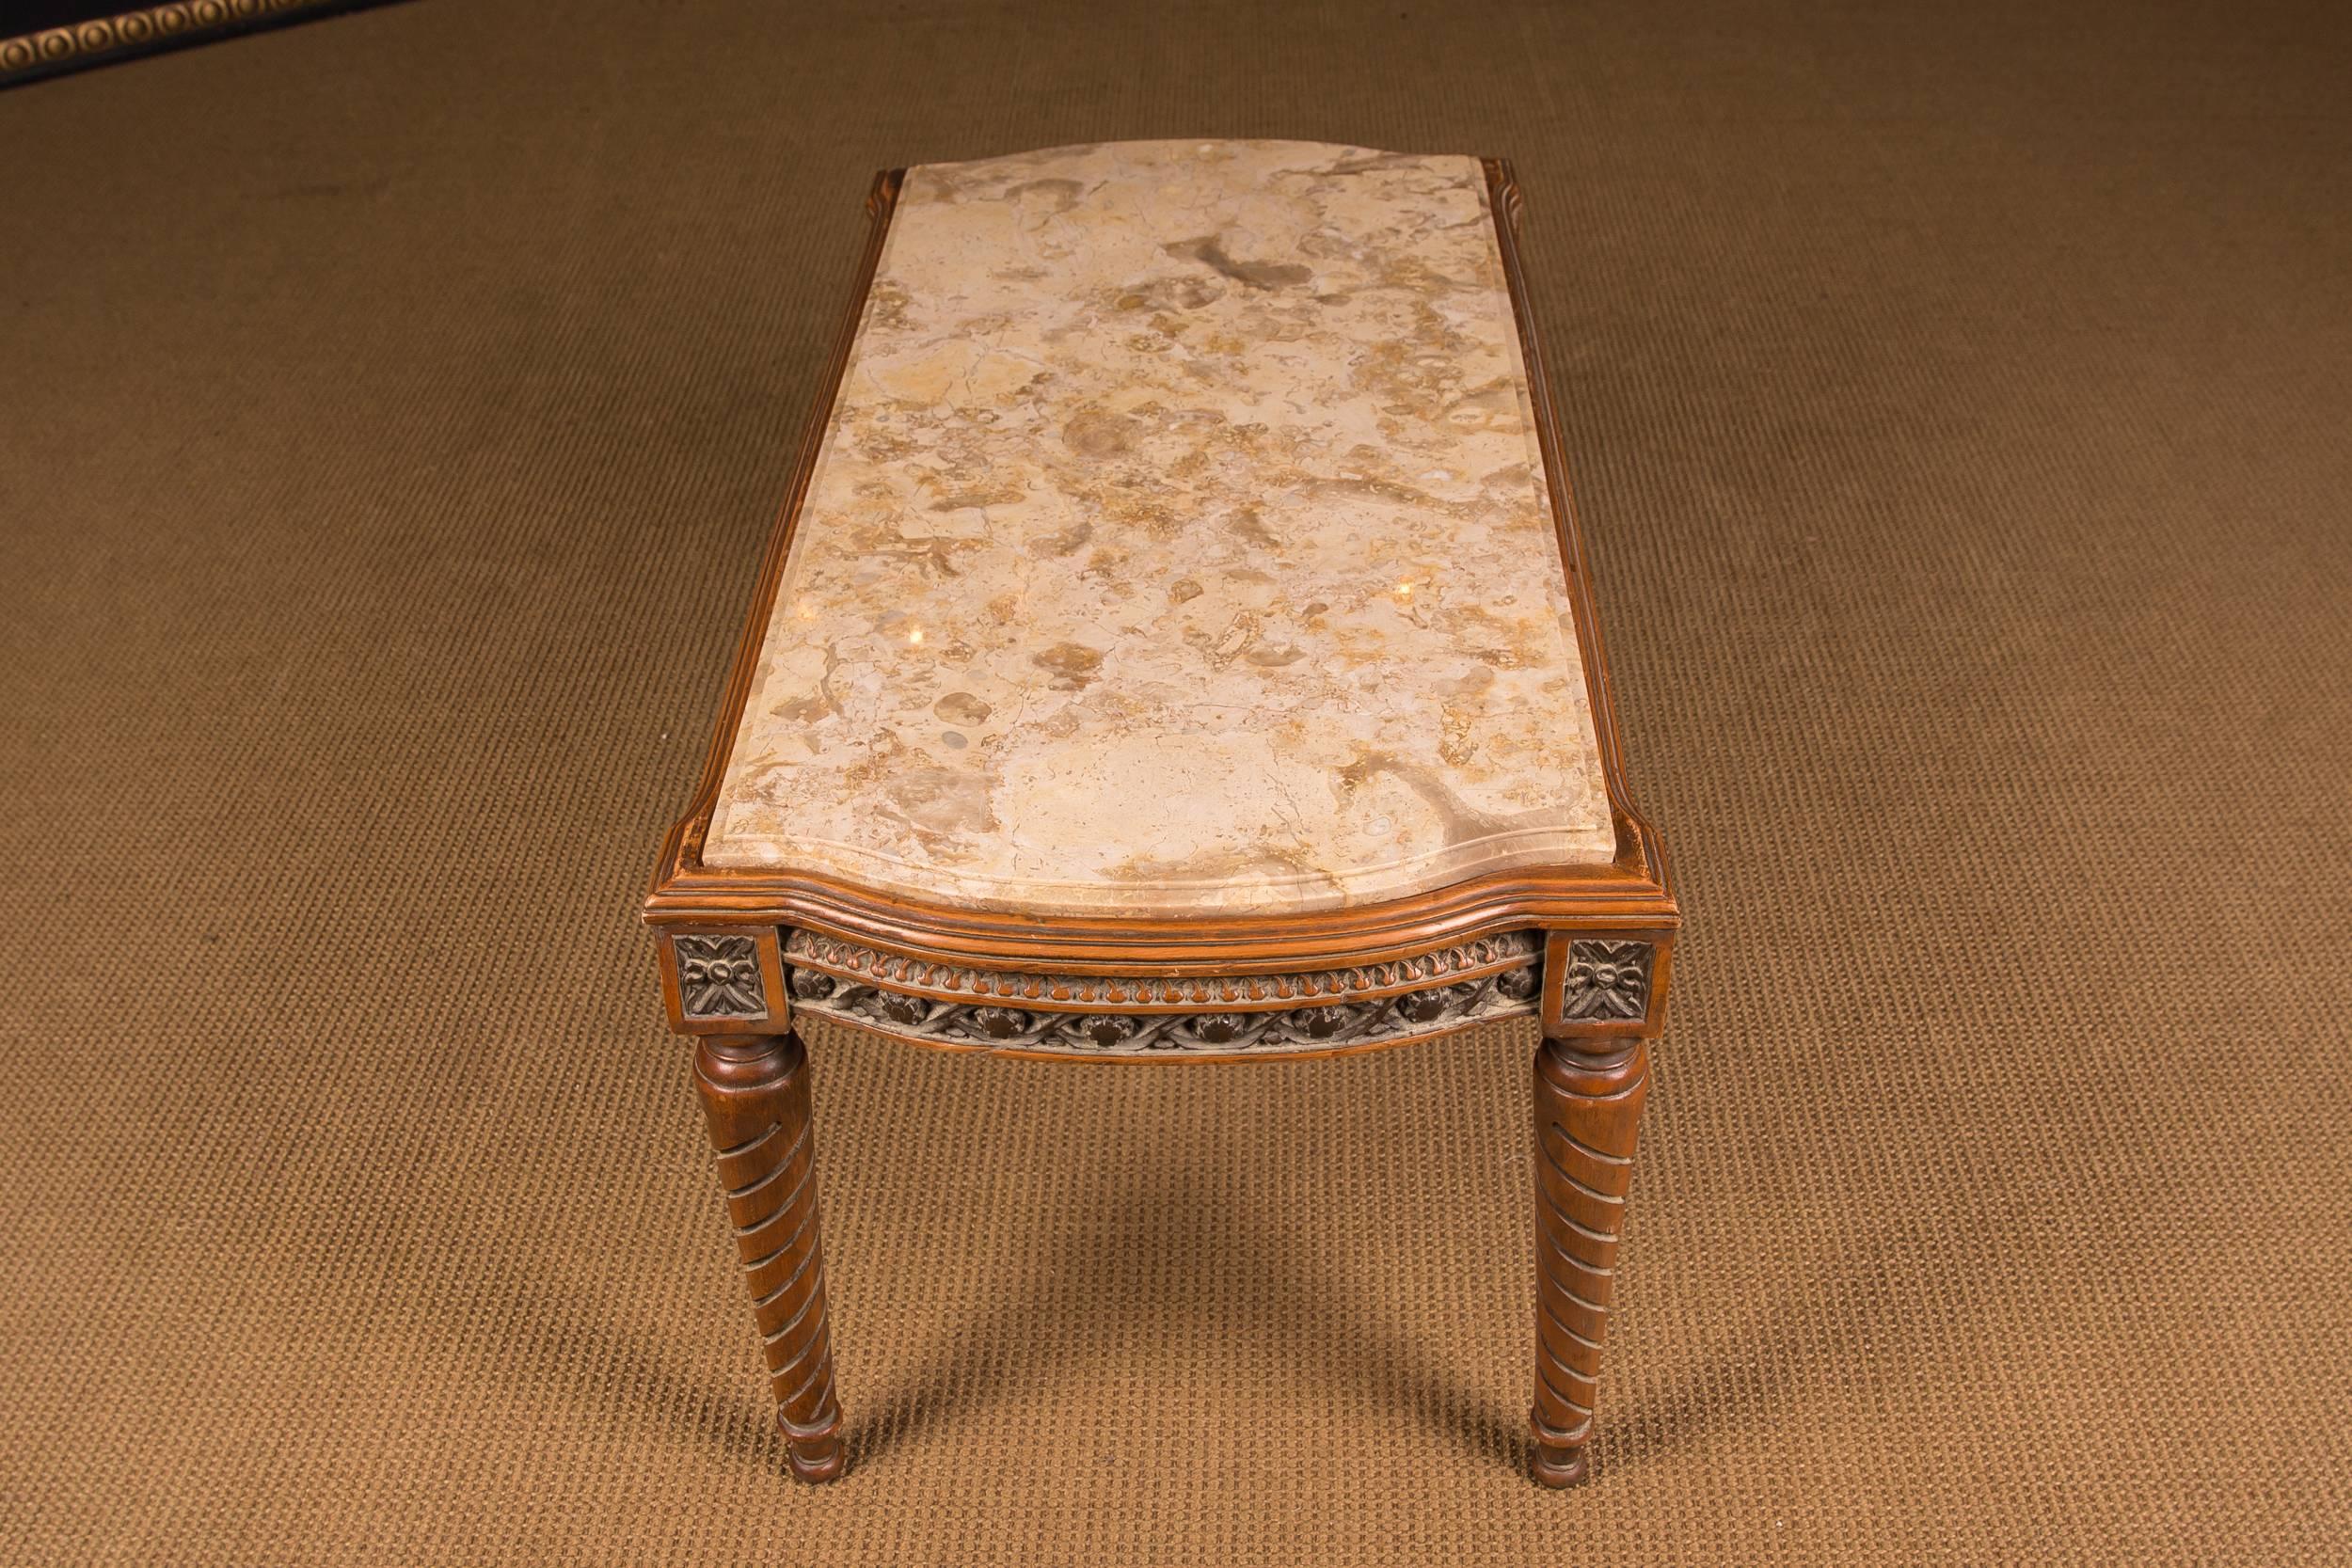 20th Century High Quality Table with Marble Top in Louis Seize Style